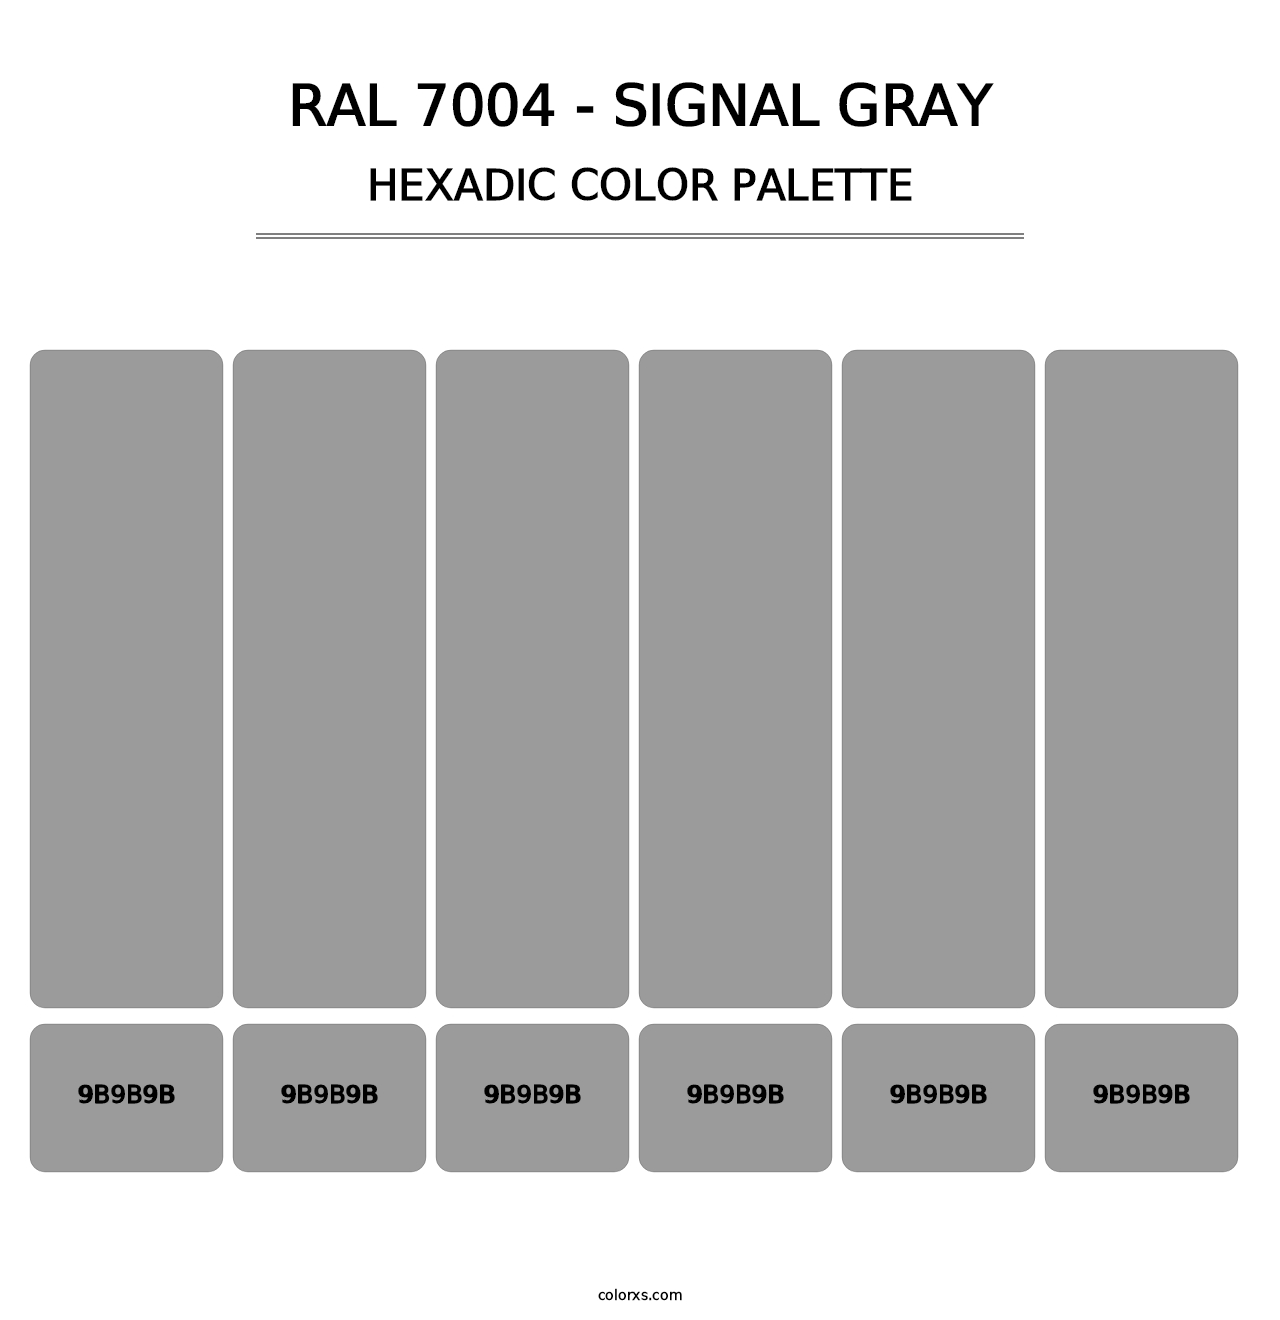 RAL 7004 - Signal Gray - Hexadic Color Palette